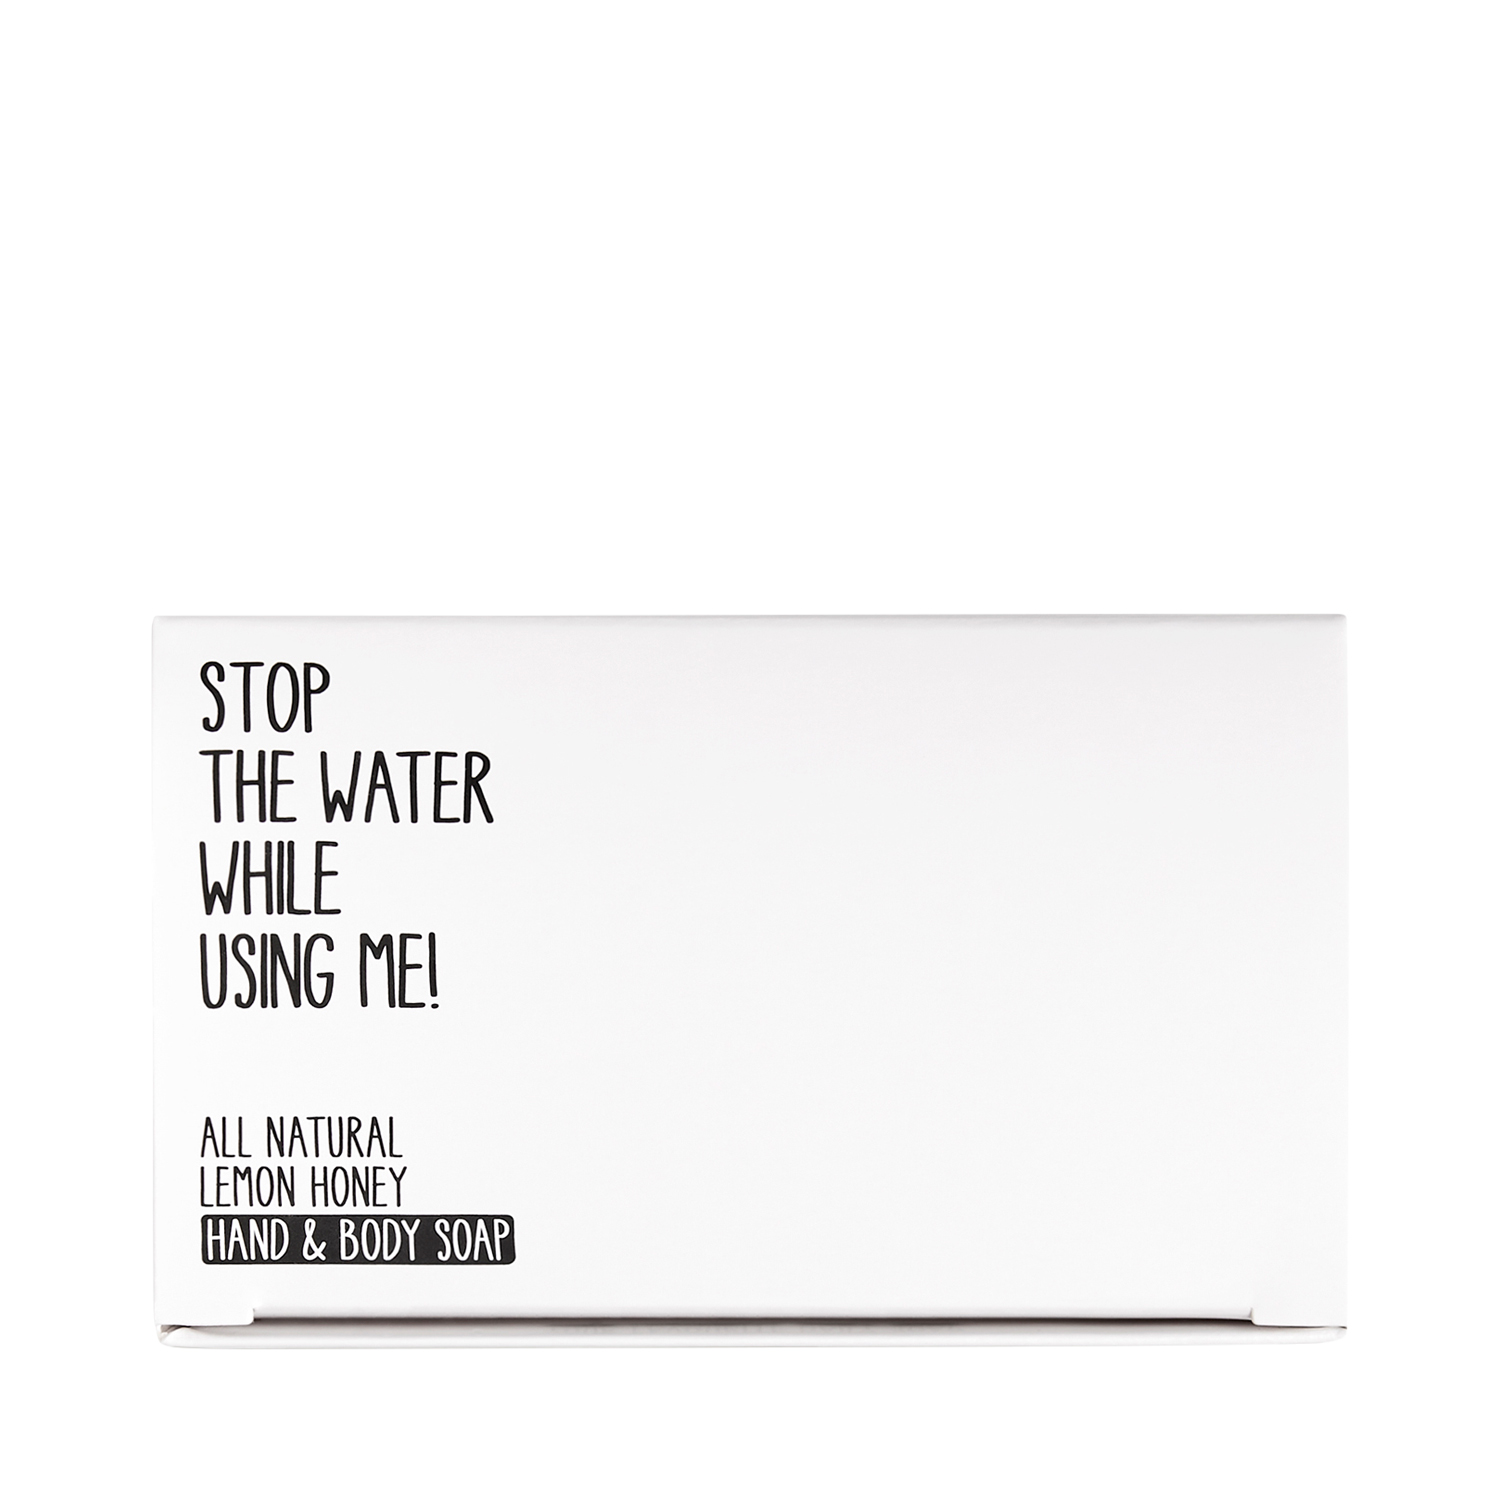 Stop The Water While Using Me! - All Natural Lemon Honey Bar Soap - Hand- & Körperseife